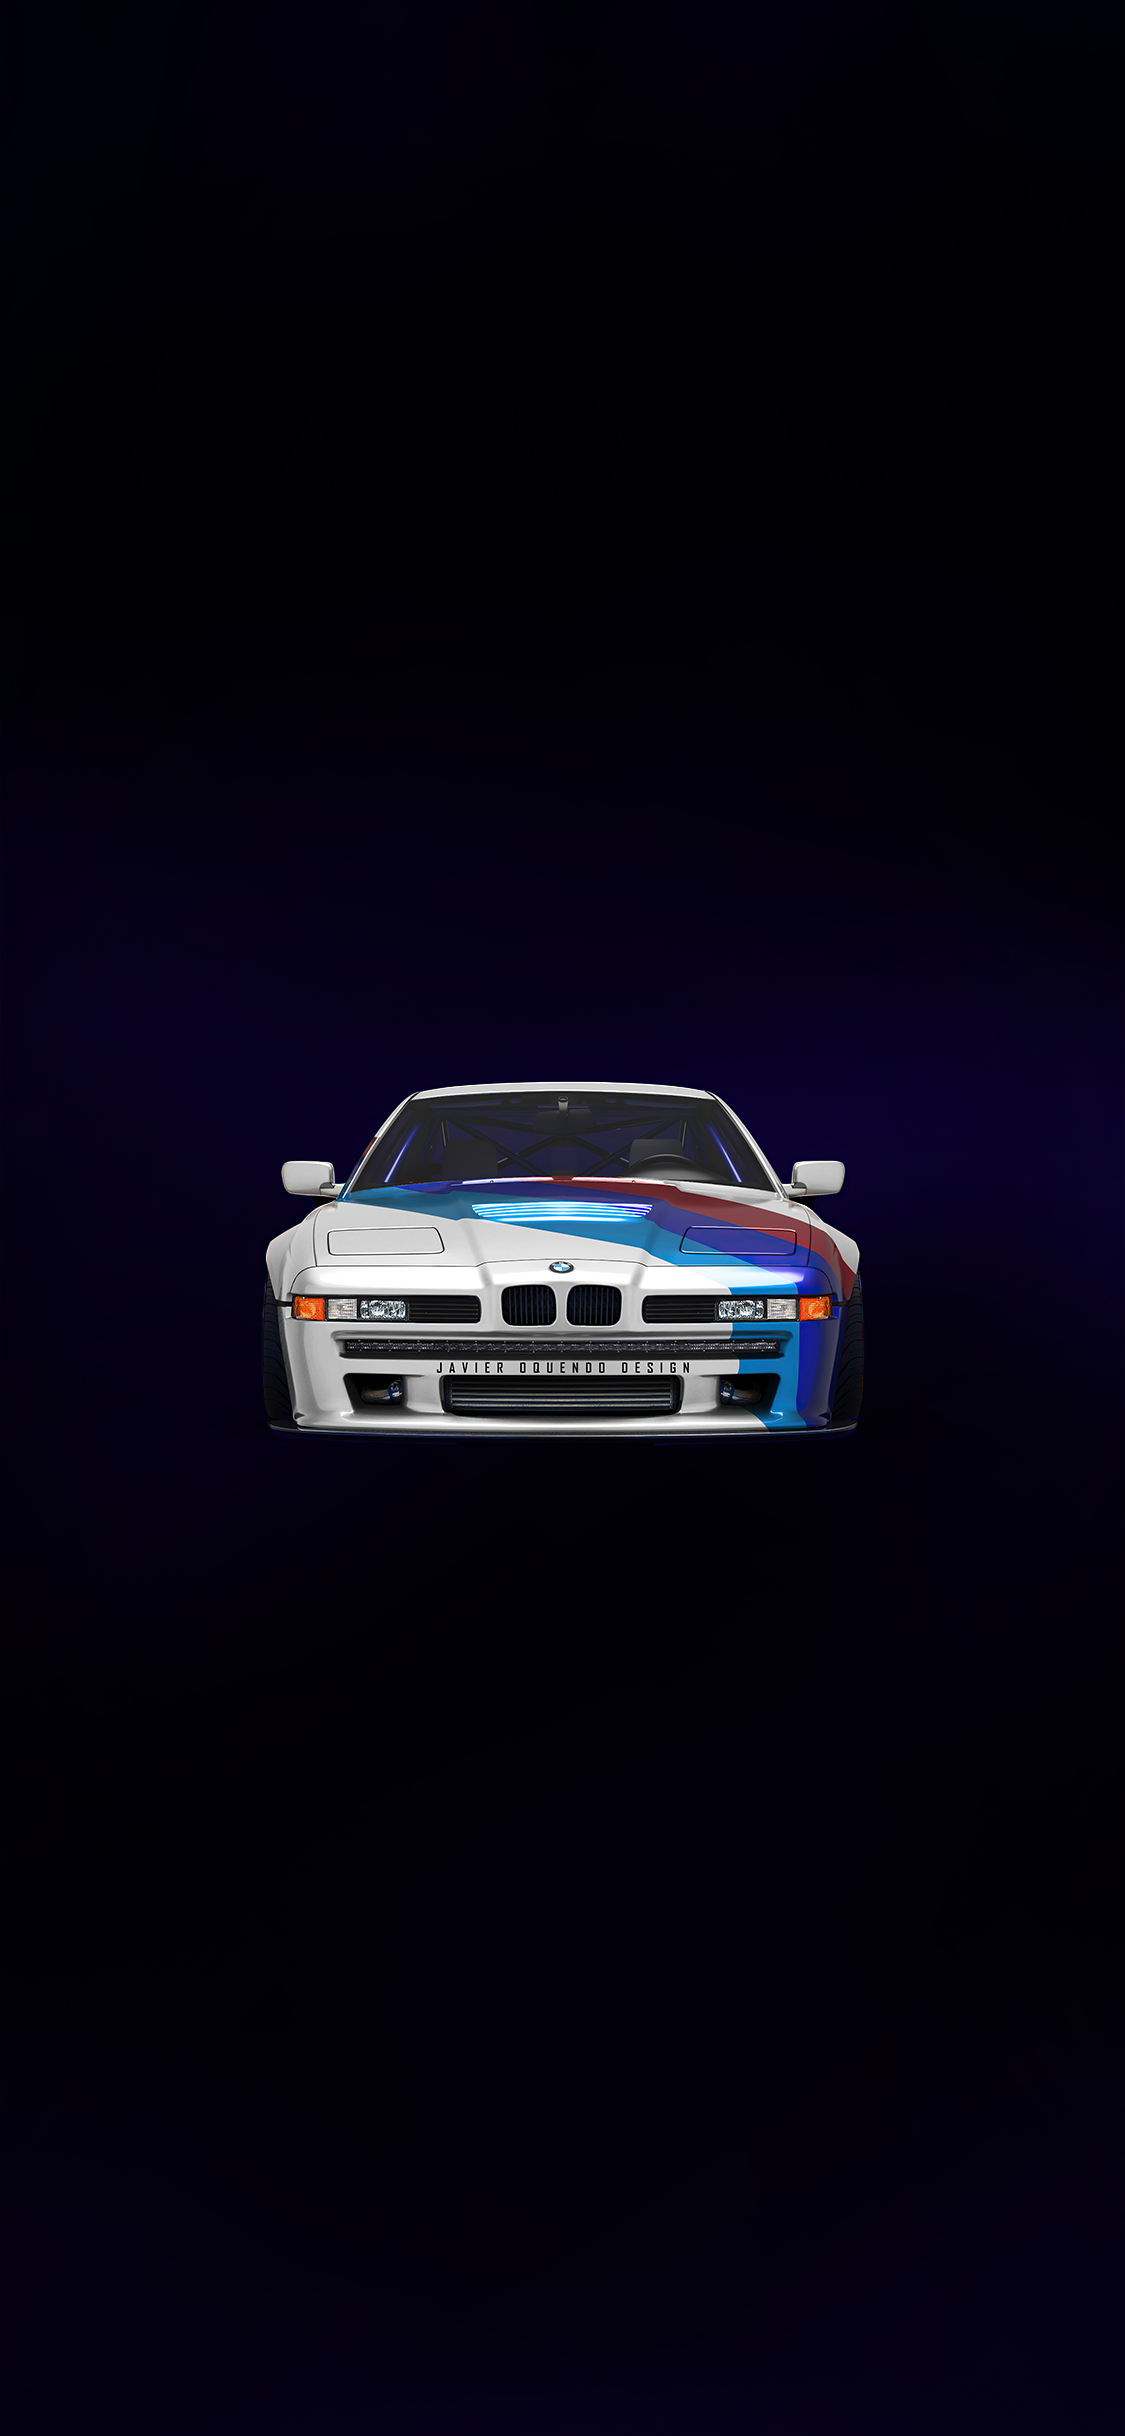 BMW Wallpapers  Top 35 Best BMW Cars Backgrounds Download